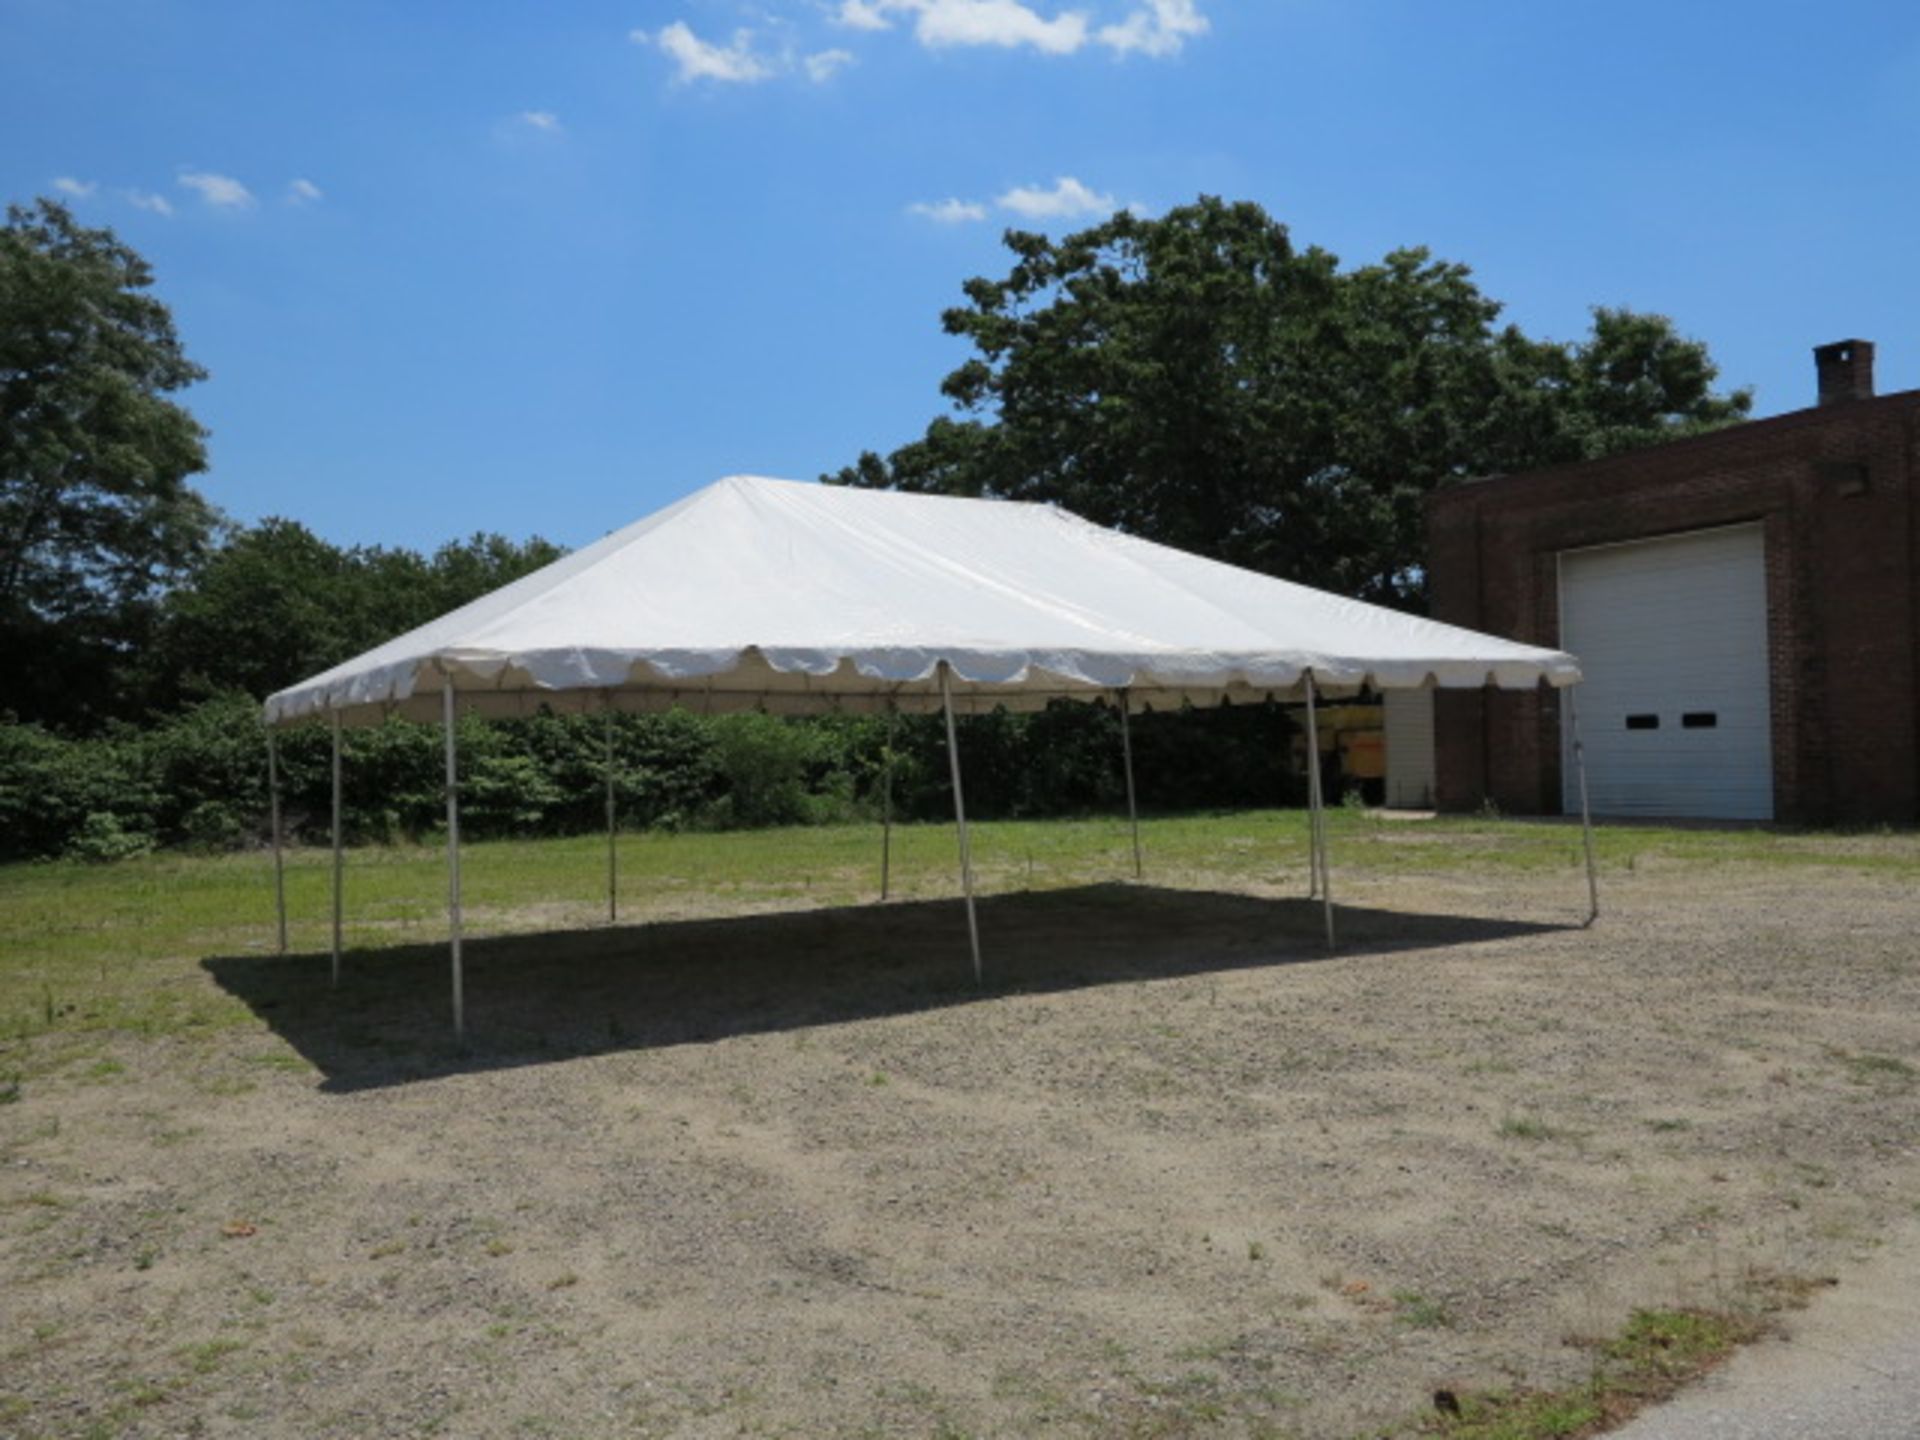 20' x 30' White Tent w/ Hardware Any images provided are for bidder's guidance only. See Terms of